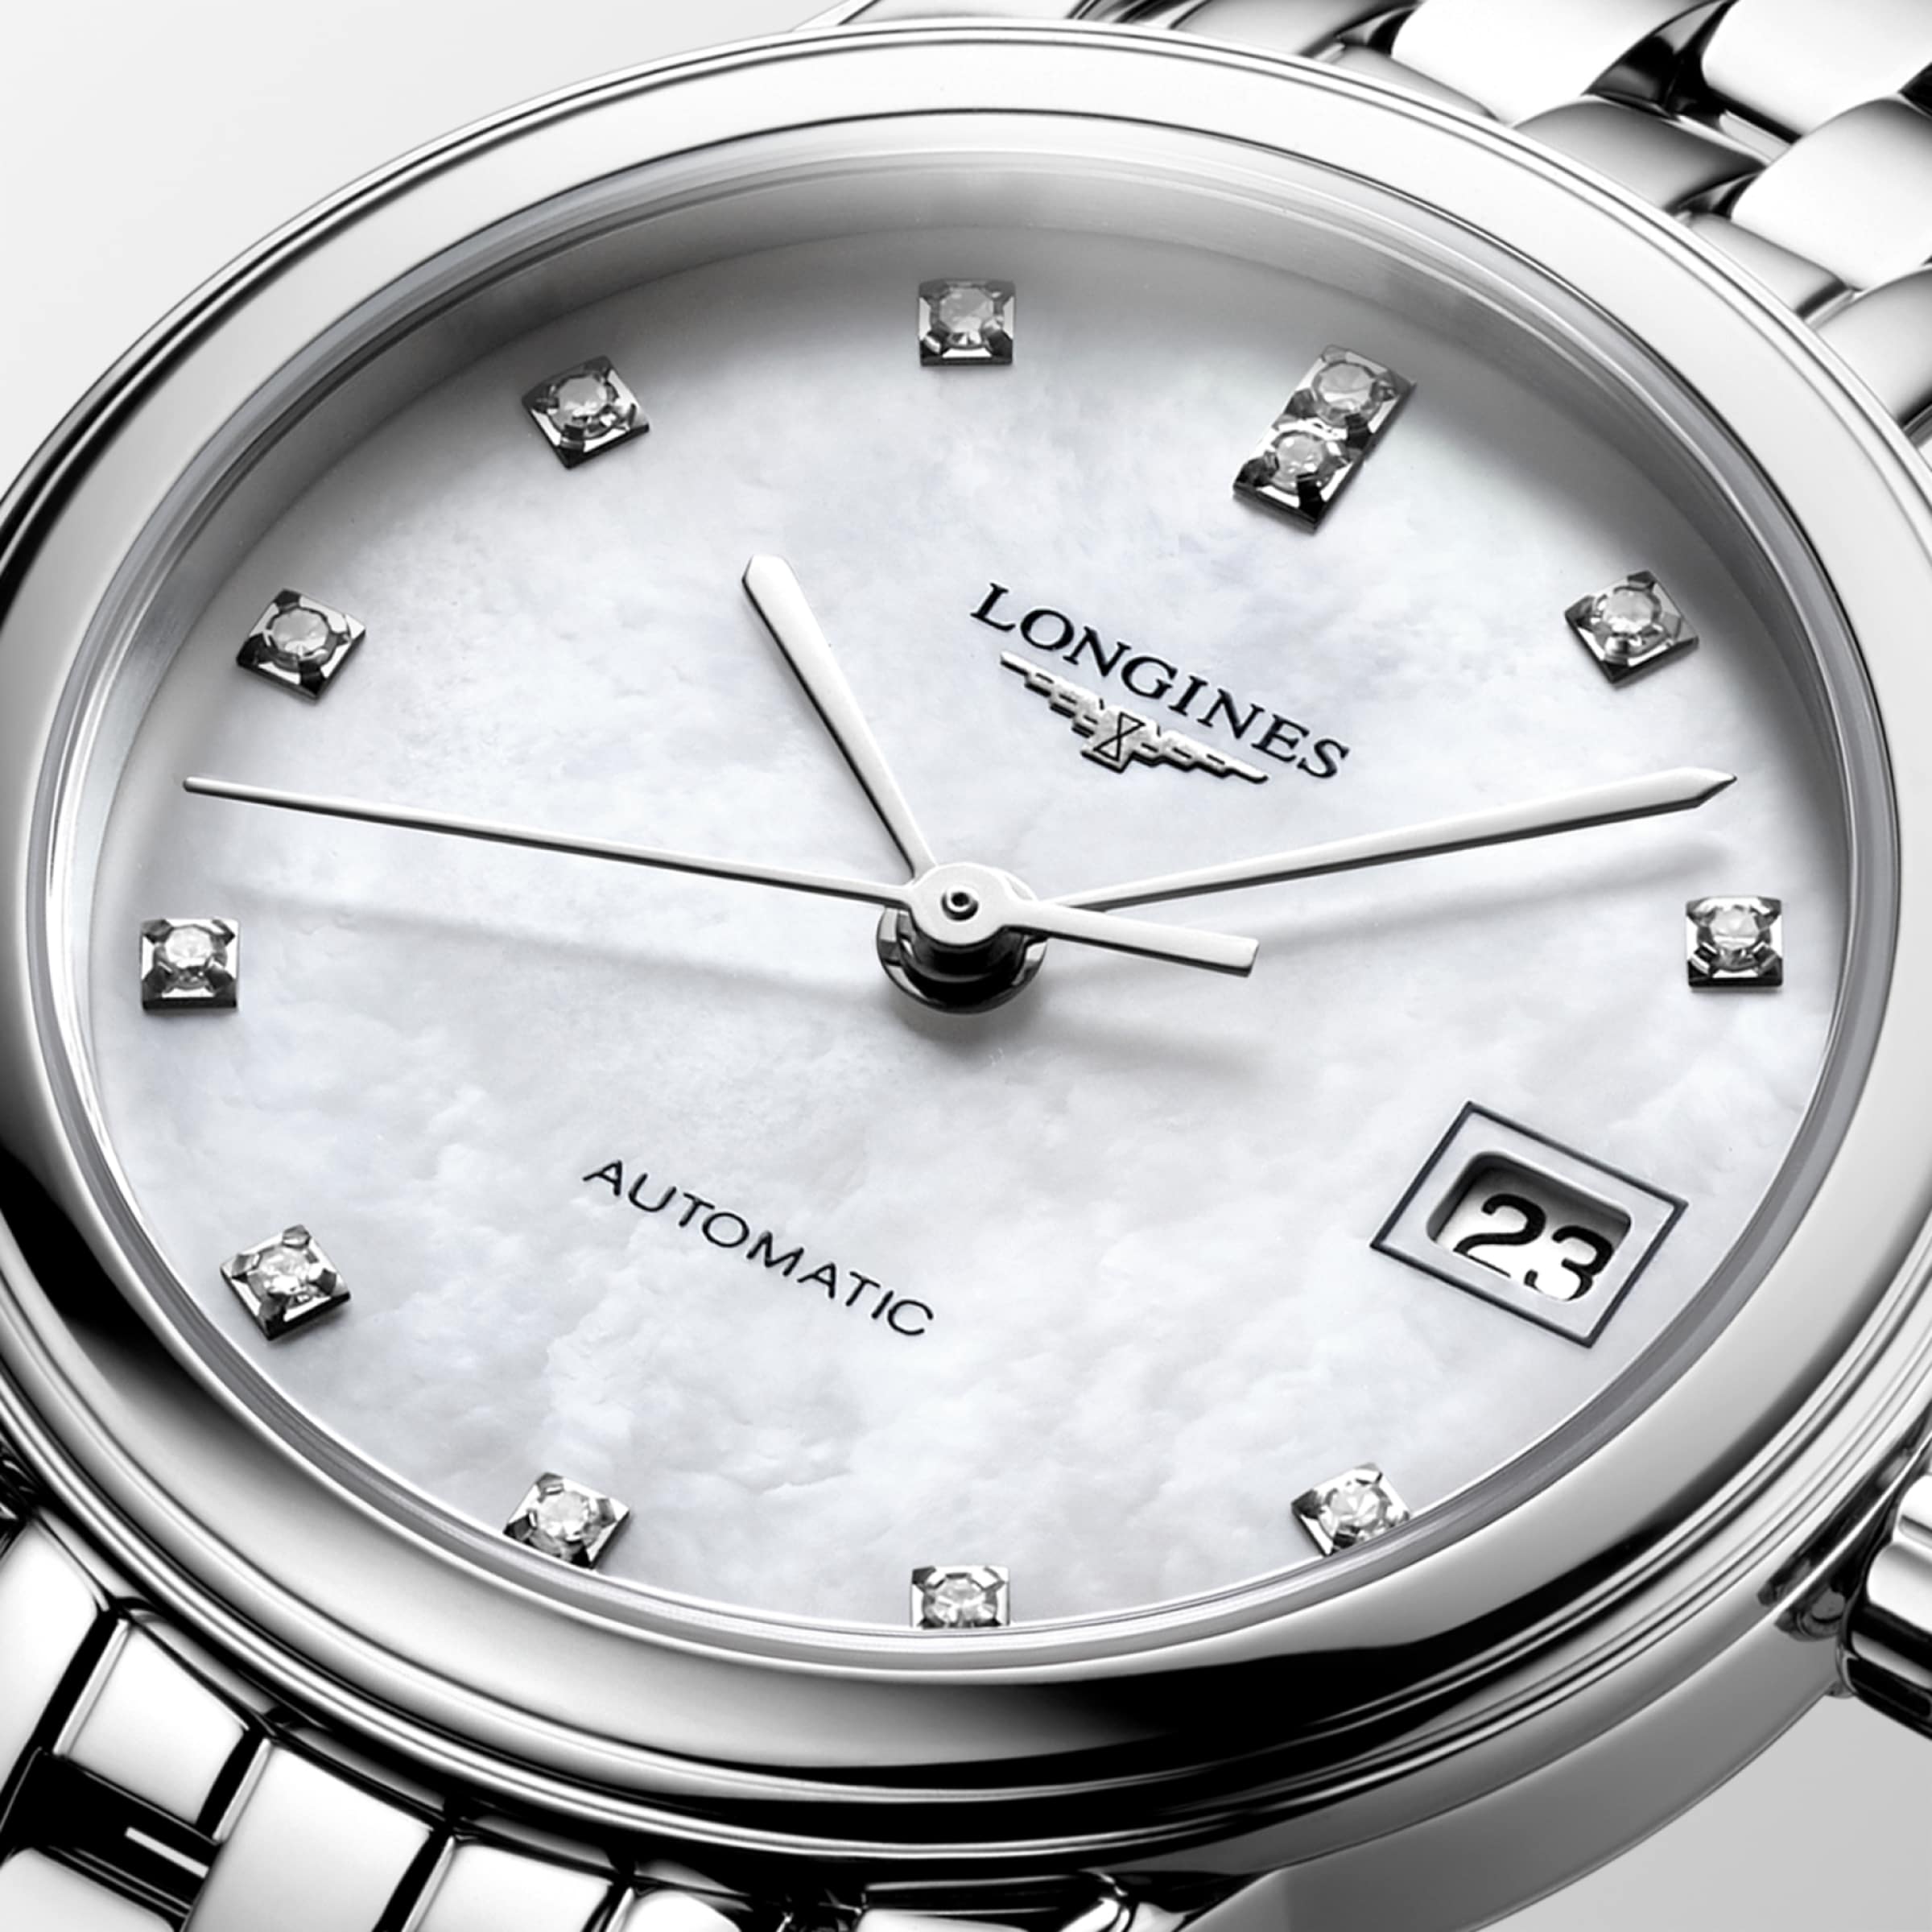 Longines FLAGSHIP Automatic Stainless steel Watch - L4.274.4.87.6